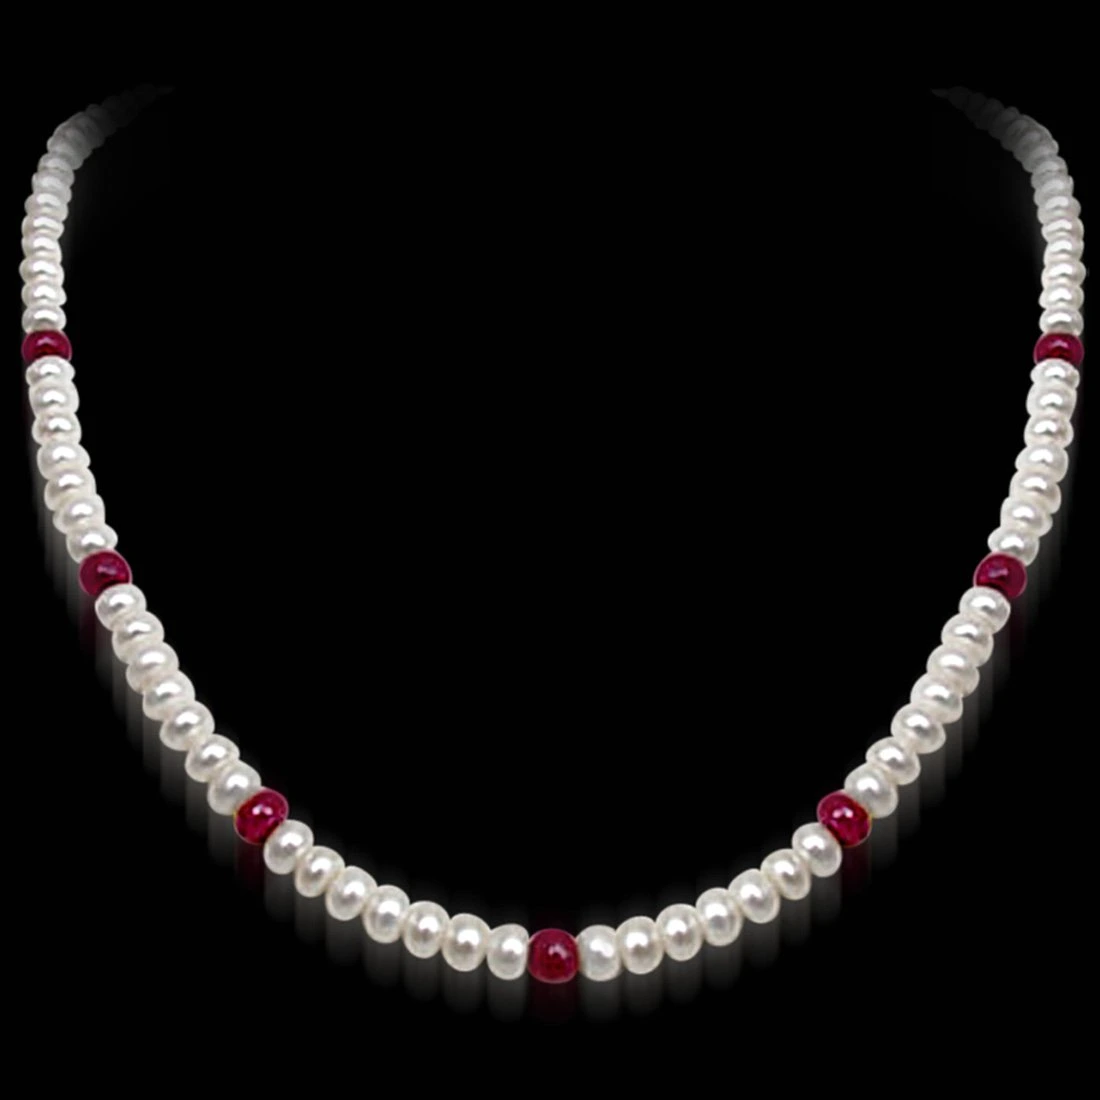 Beloved n Beautiful - Single Line Real Ruby Beads & Freshwater Pearl Necklace for Women (SN306)